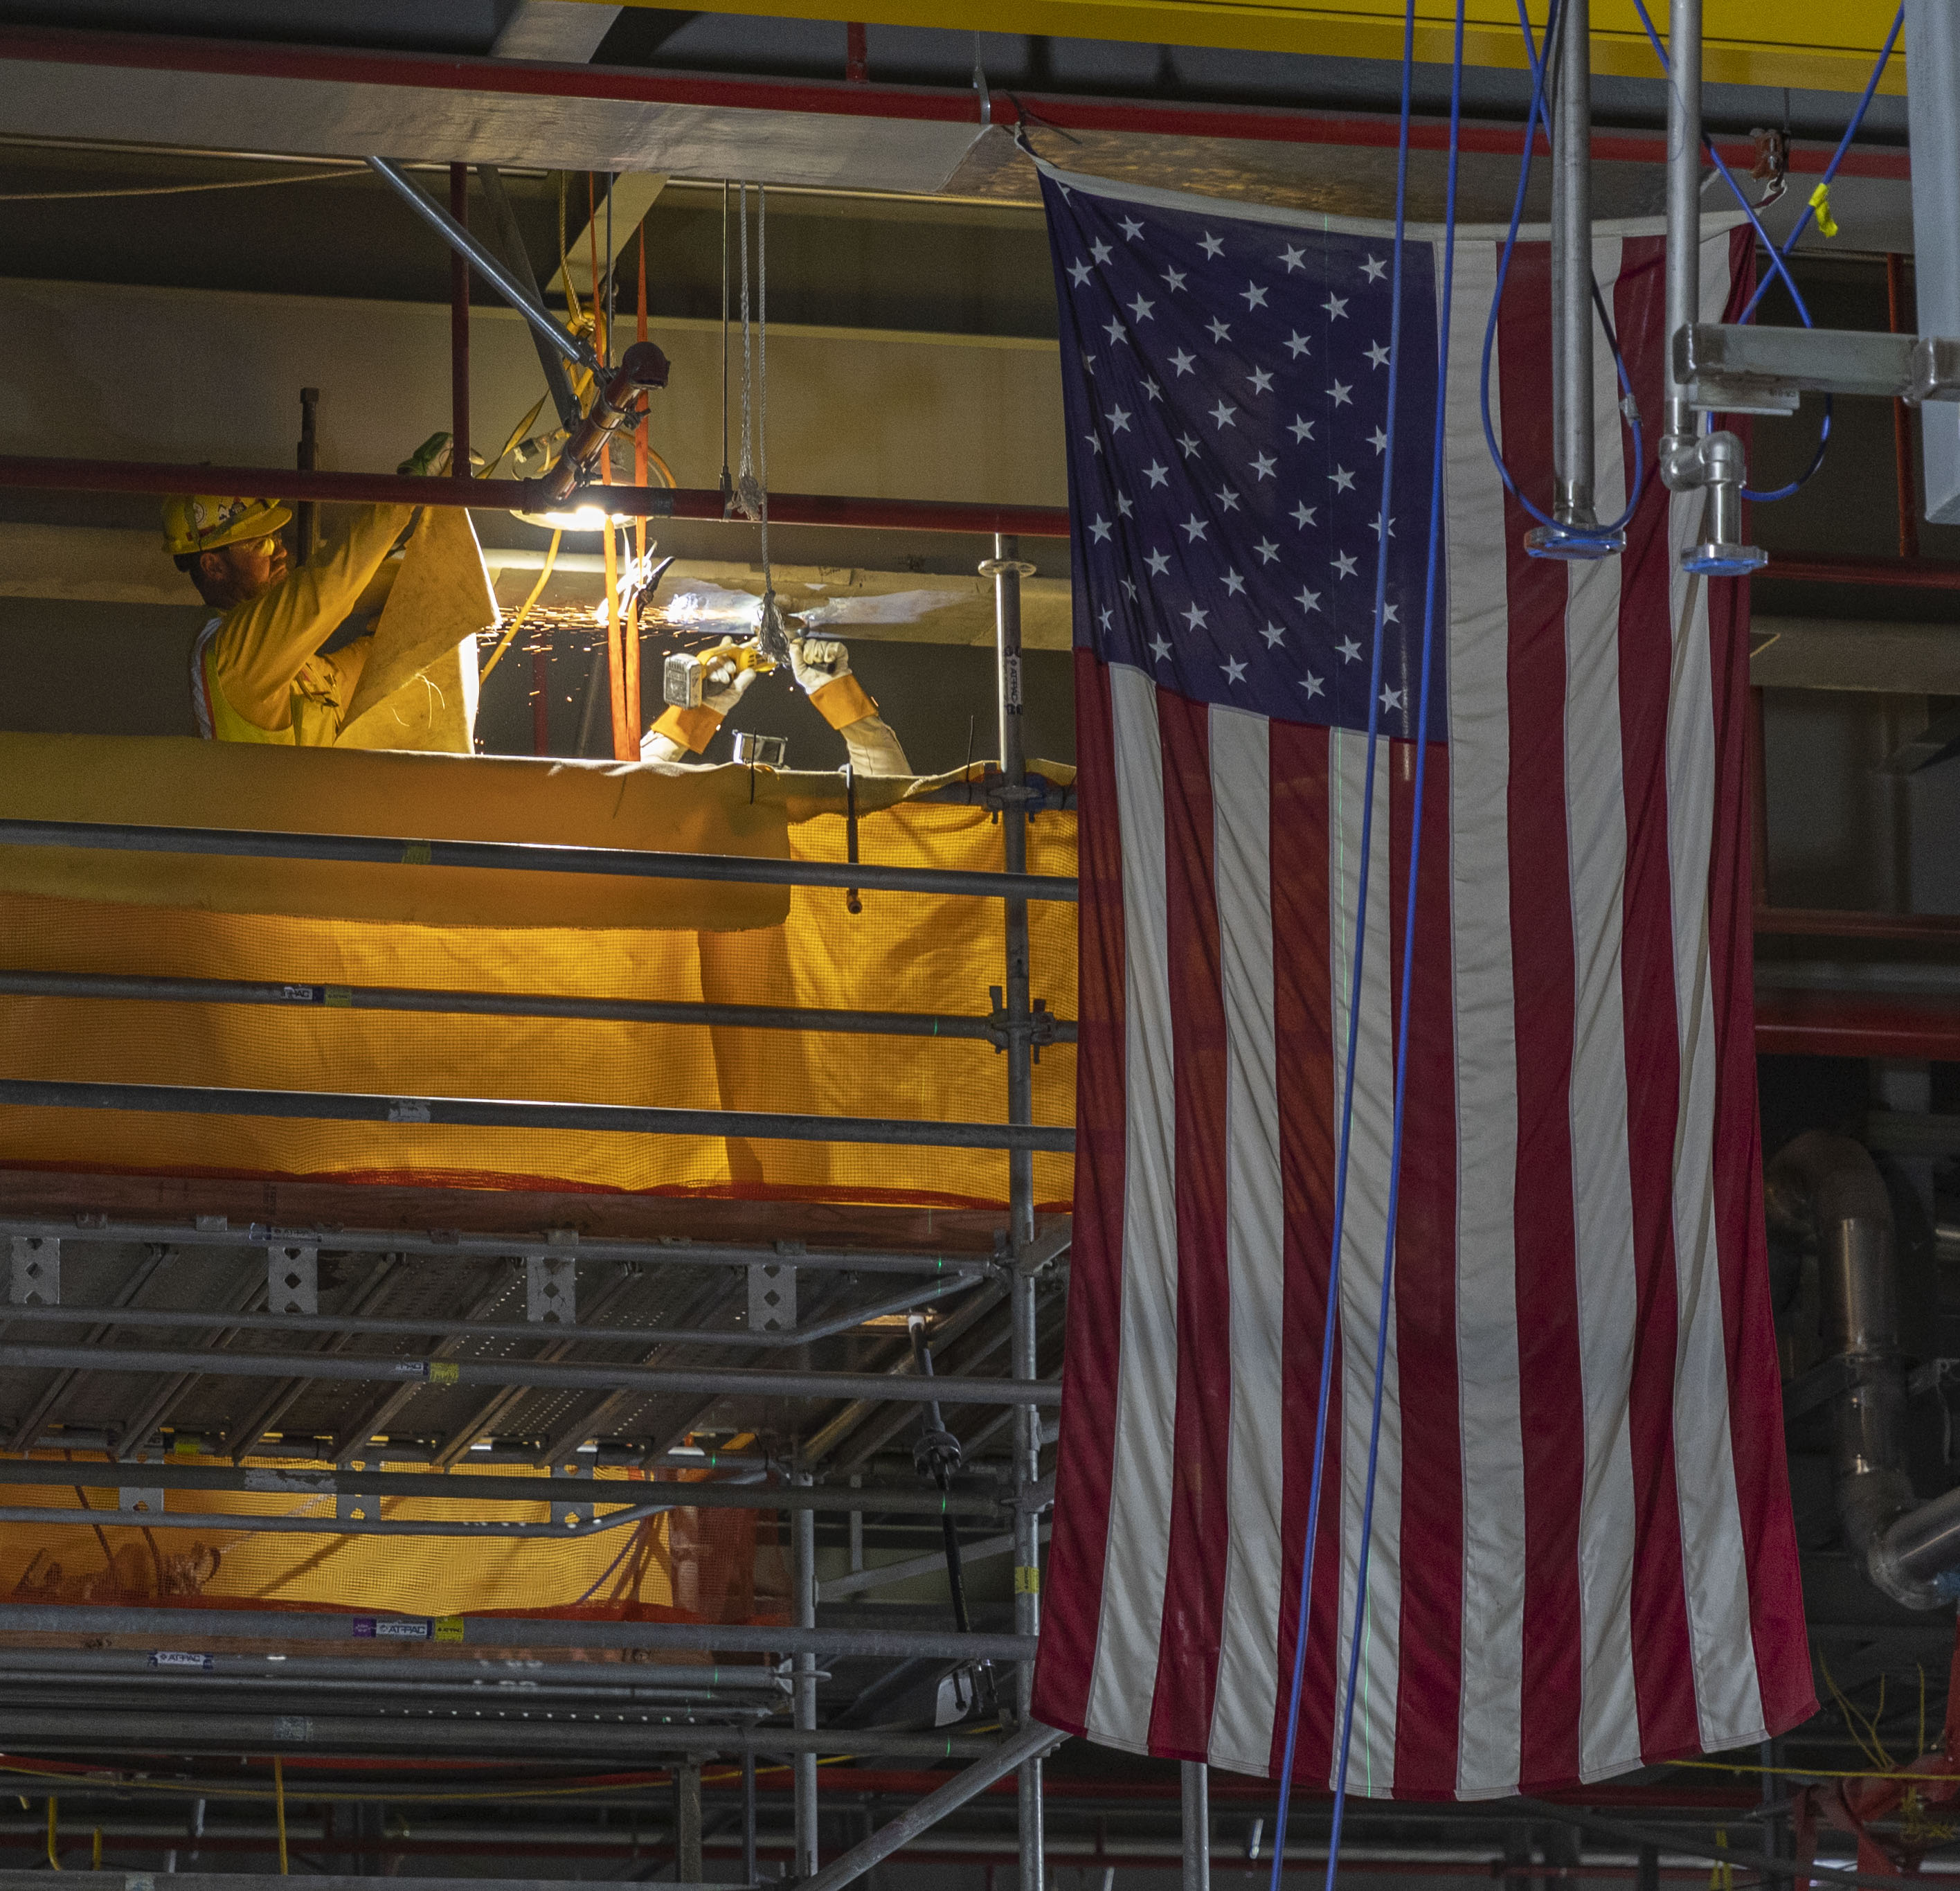 Ironworkers prep structural steel for pipe supports installation in the Main Process Building Main Casting Area 